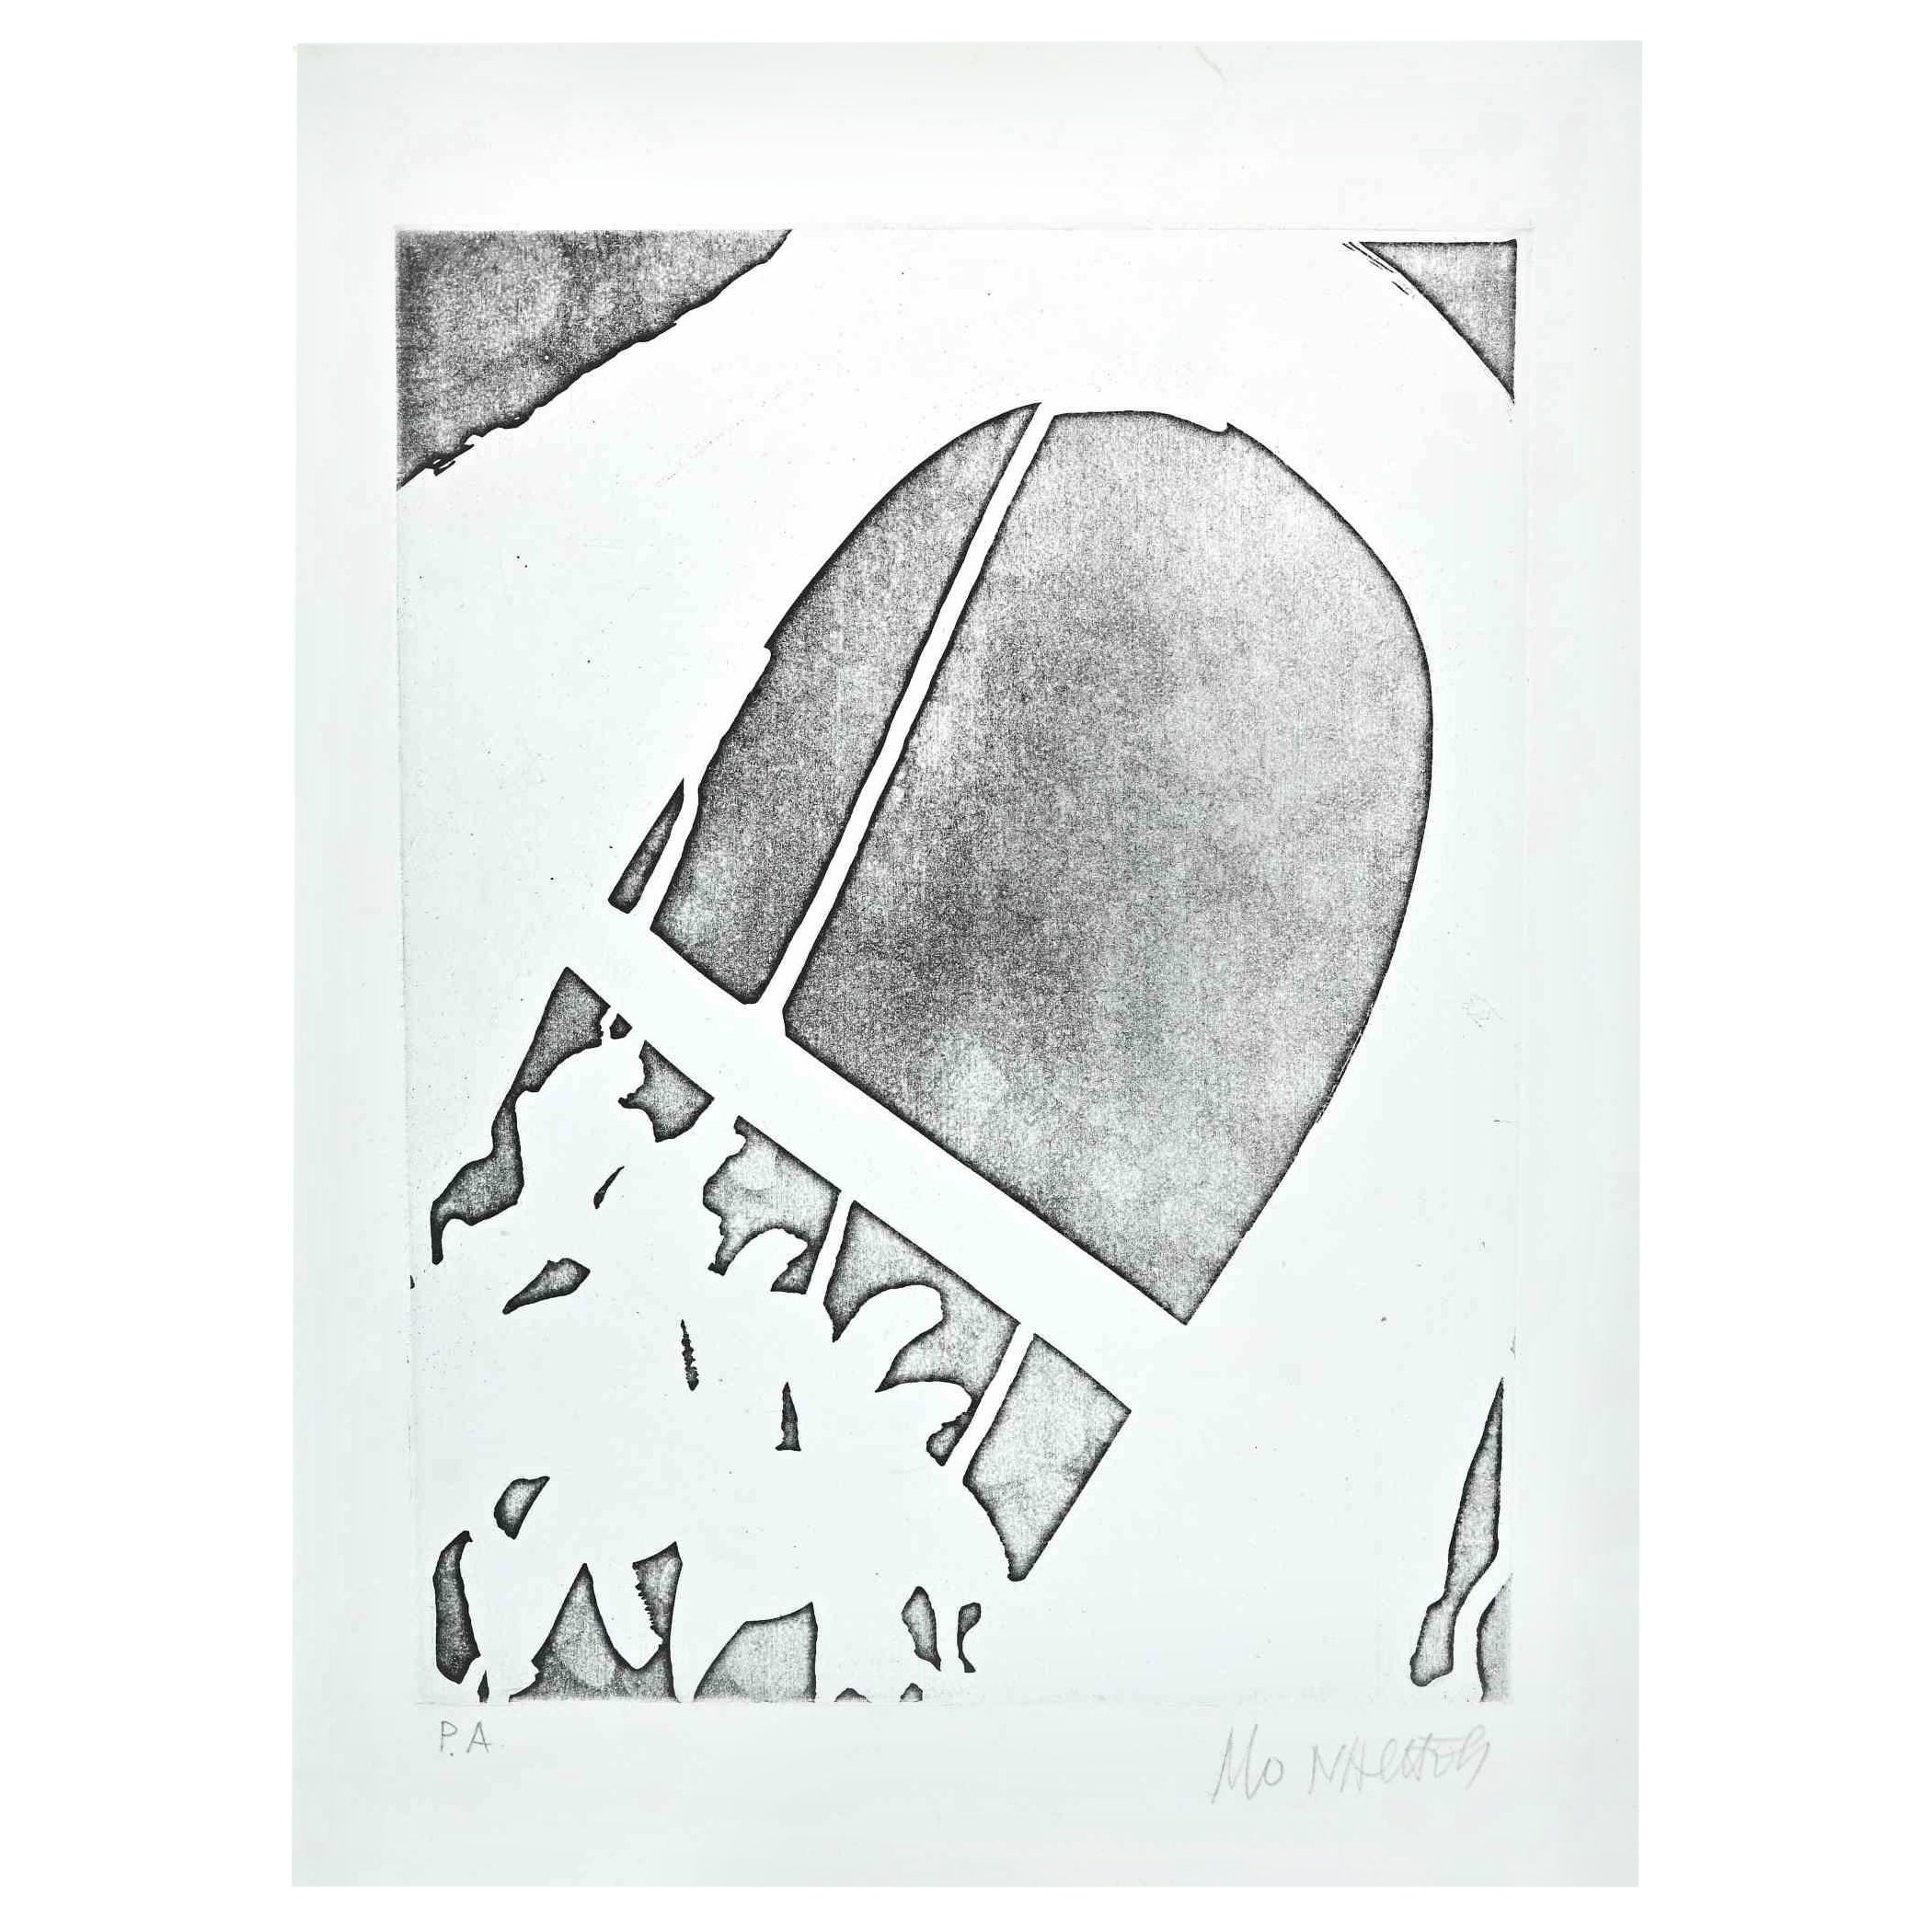 Figure and Arch is an original etching artwork on paper realized by Sante Monachesi.

Hand-signed on the lower right by pencil.

it is an artist's proofs edition on the lower left.

Good conditions.

The artwork is created in perfect composition in